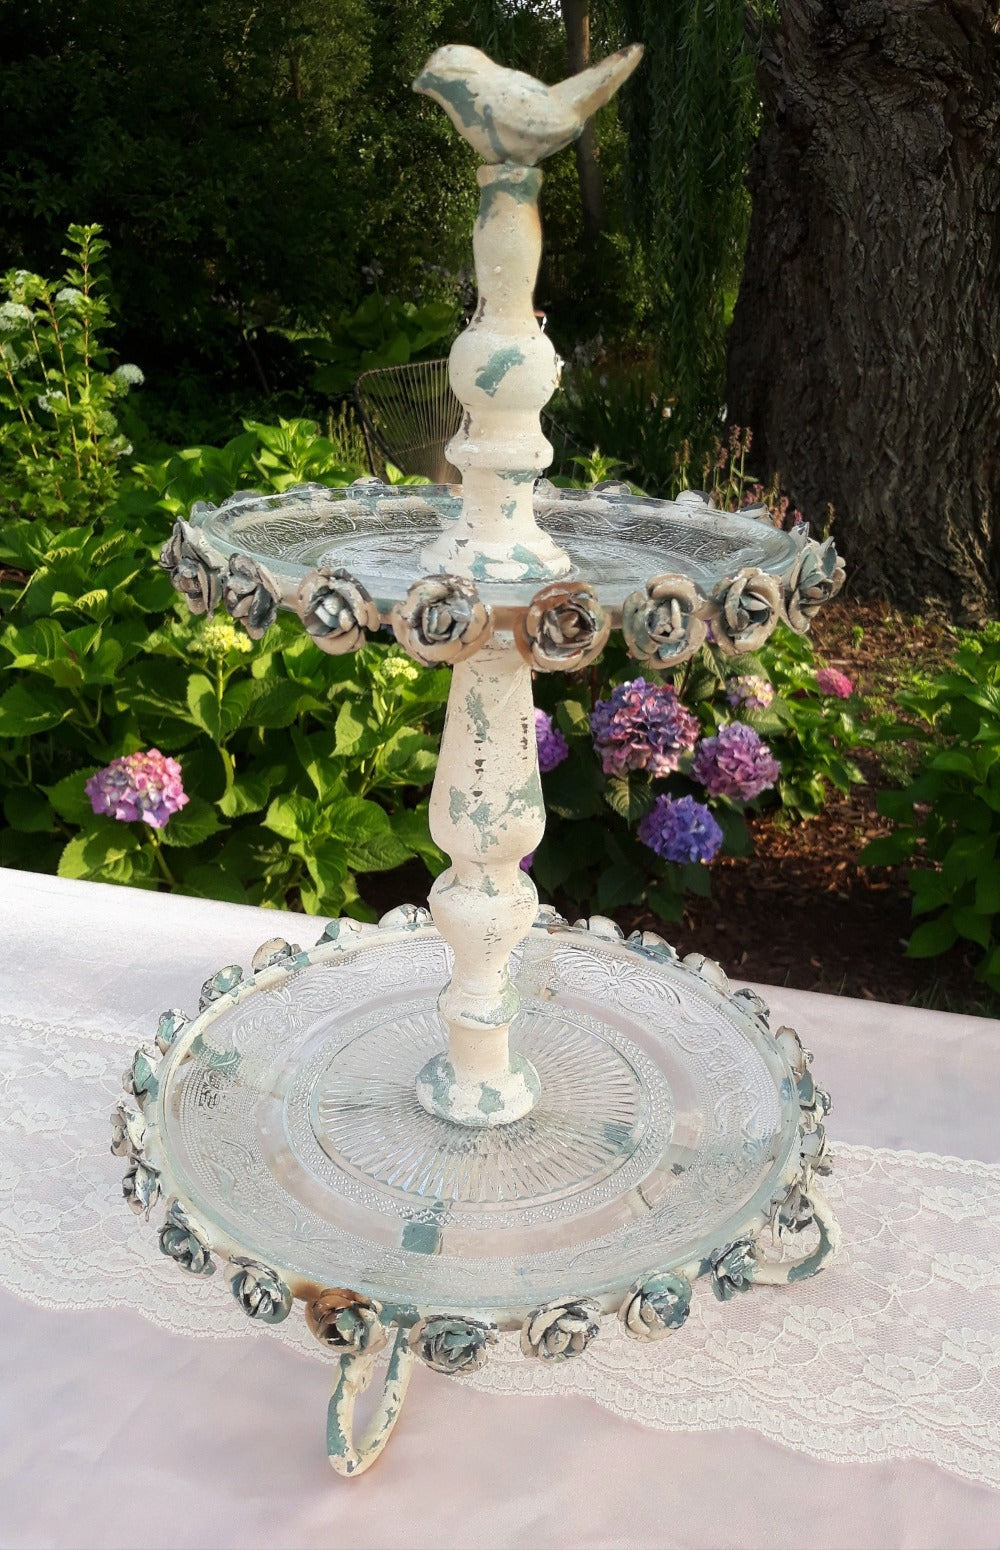 2-Tier Rustic Glass Stand with Roses & Bird - Vintage Party Rentals - Royal Table Settings